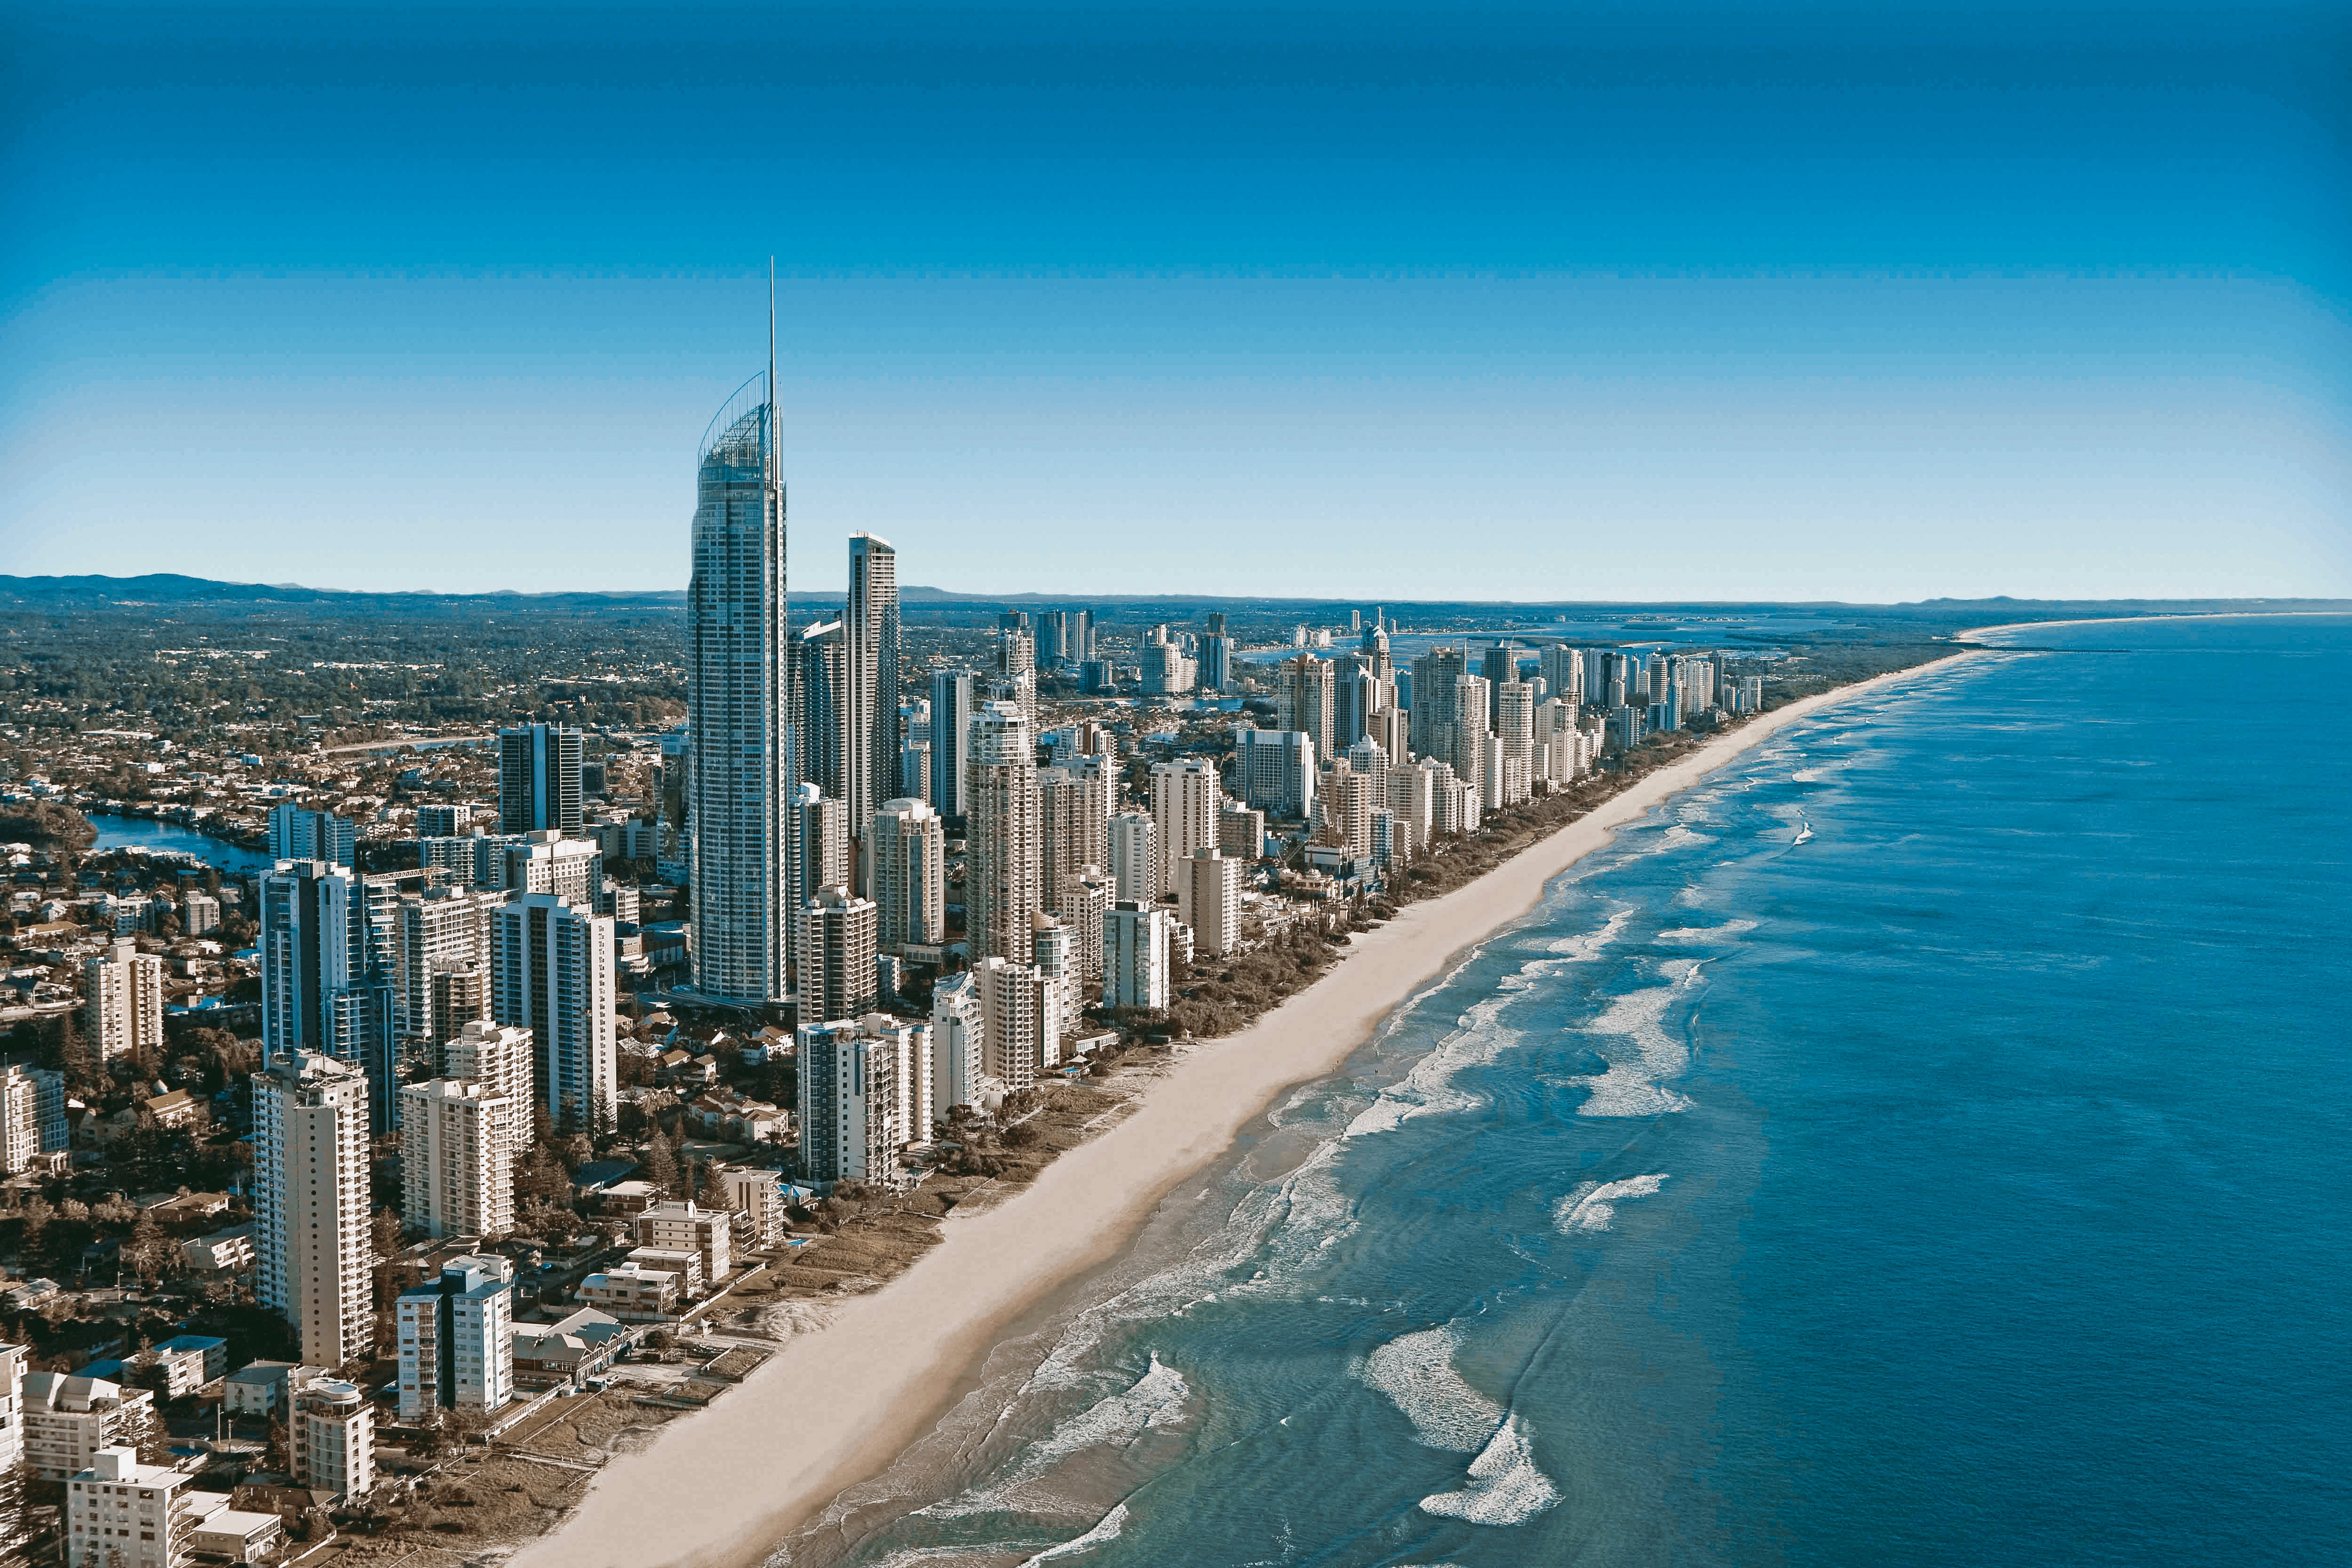 A long sandy coast with high-rises and skyscrapers